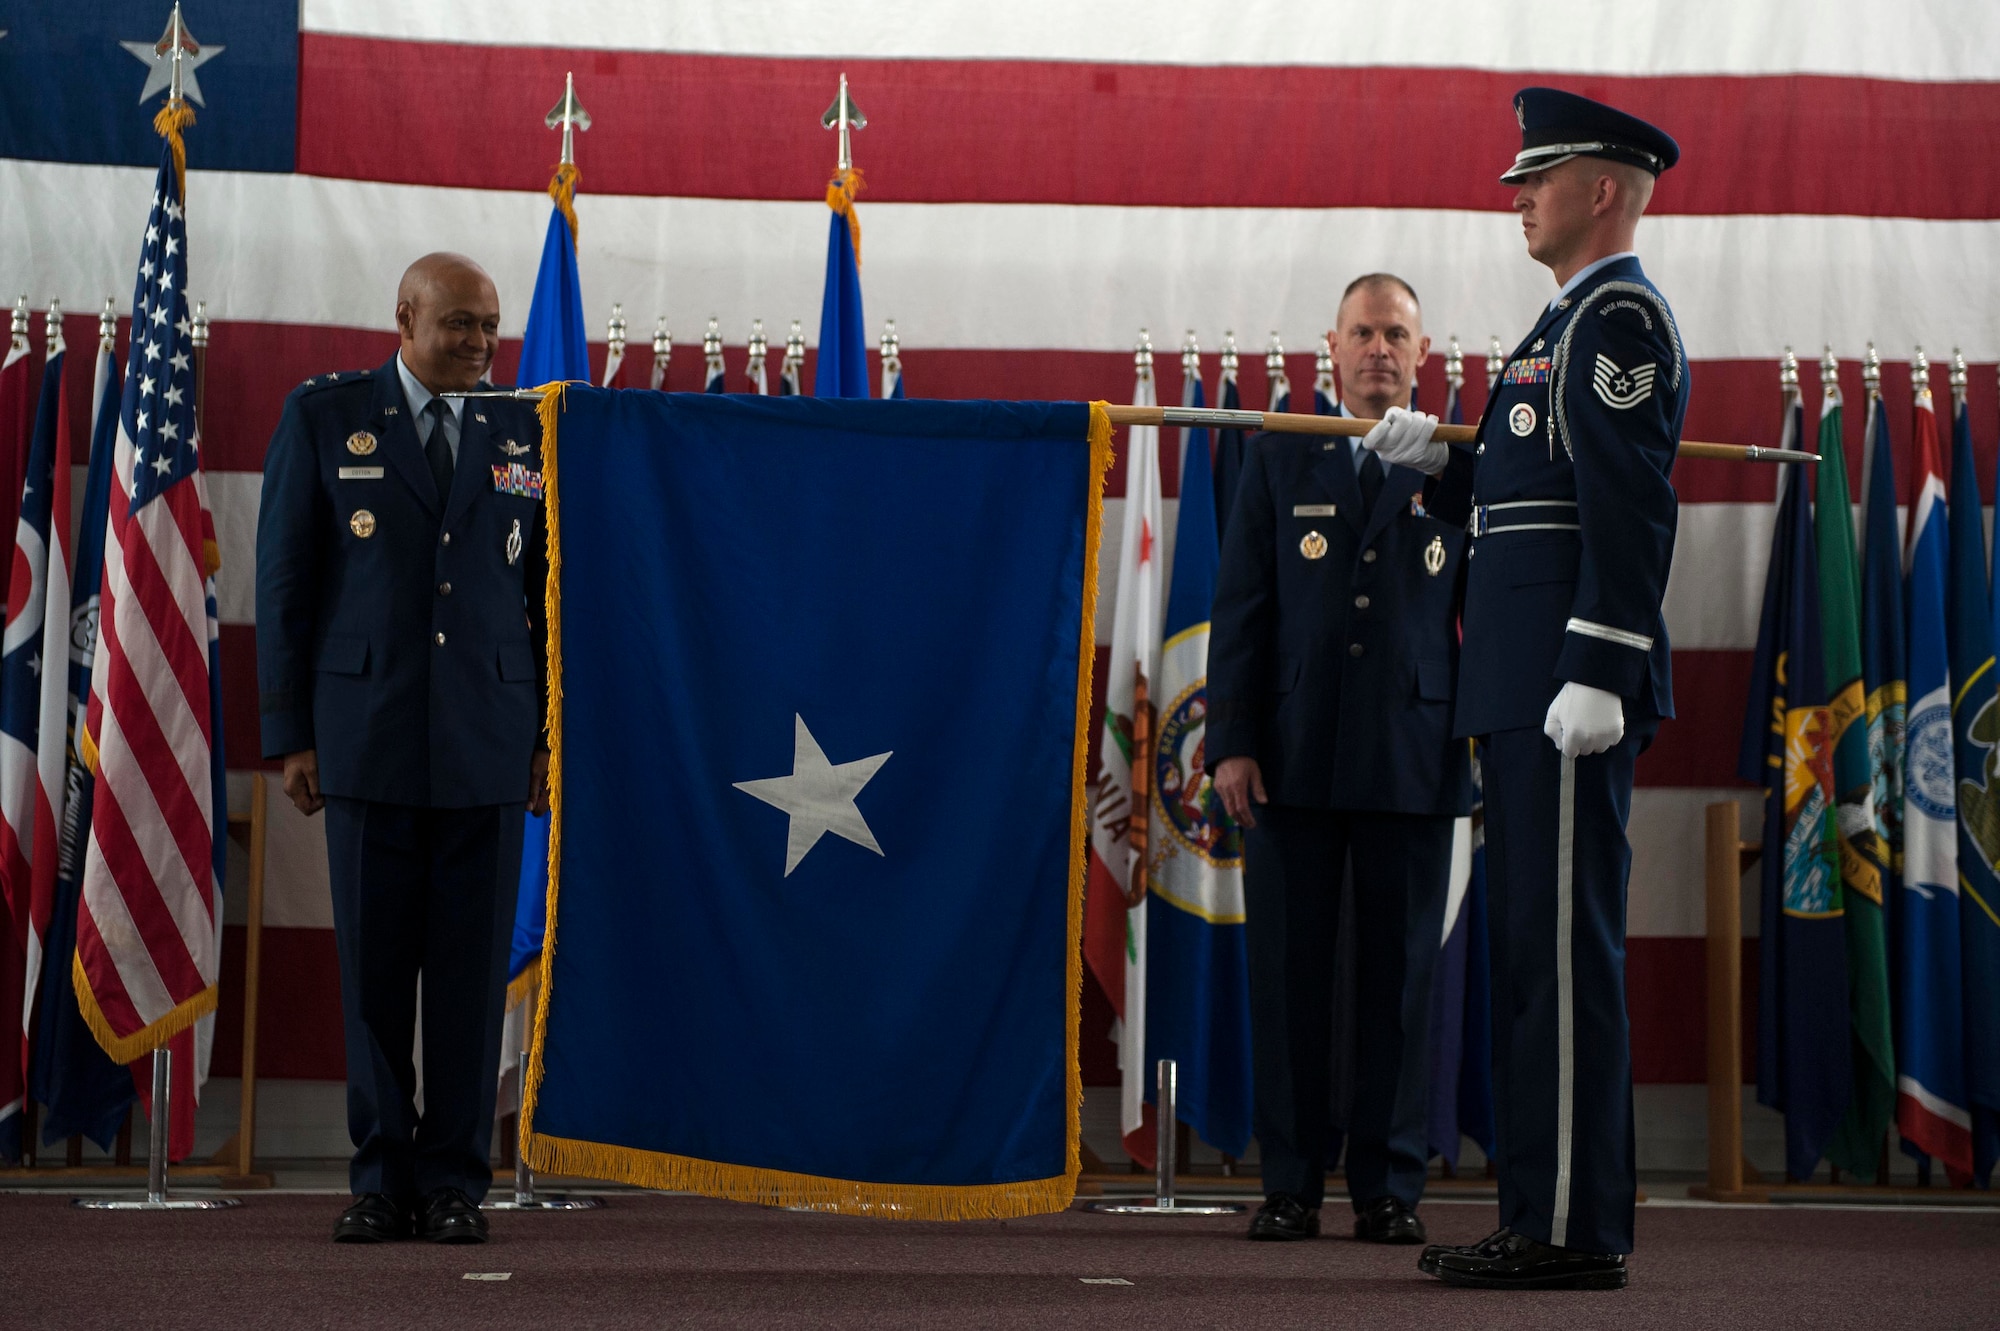 New Brig. Gen. Michael Lutton, who is headed to the Pentagon to work with the Department of Energy, is presented his Brig. Gen. flag by Tech. Sgt. Joshua Hull, non-commissioned officer in charge of Base Honor Guard, at Minot Air Force Base, N.D., June 17, 2016. The presentation of the General flag is an Air Force tradition. (U.S. Air Force photo/Senior Airman Kristoffer Kaubisch) 